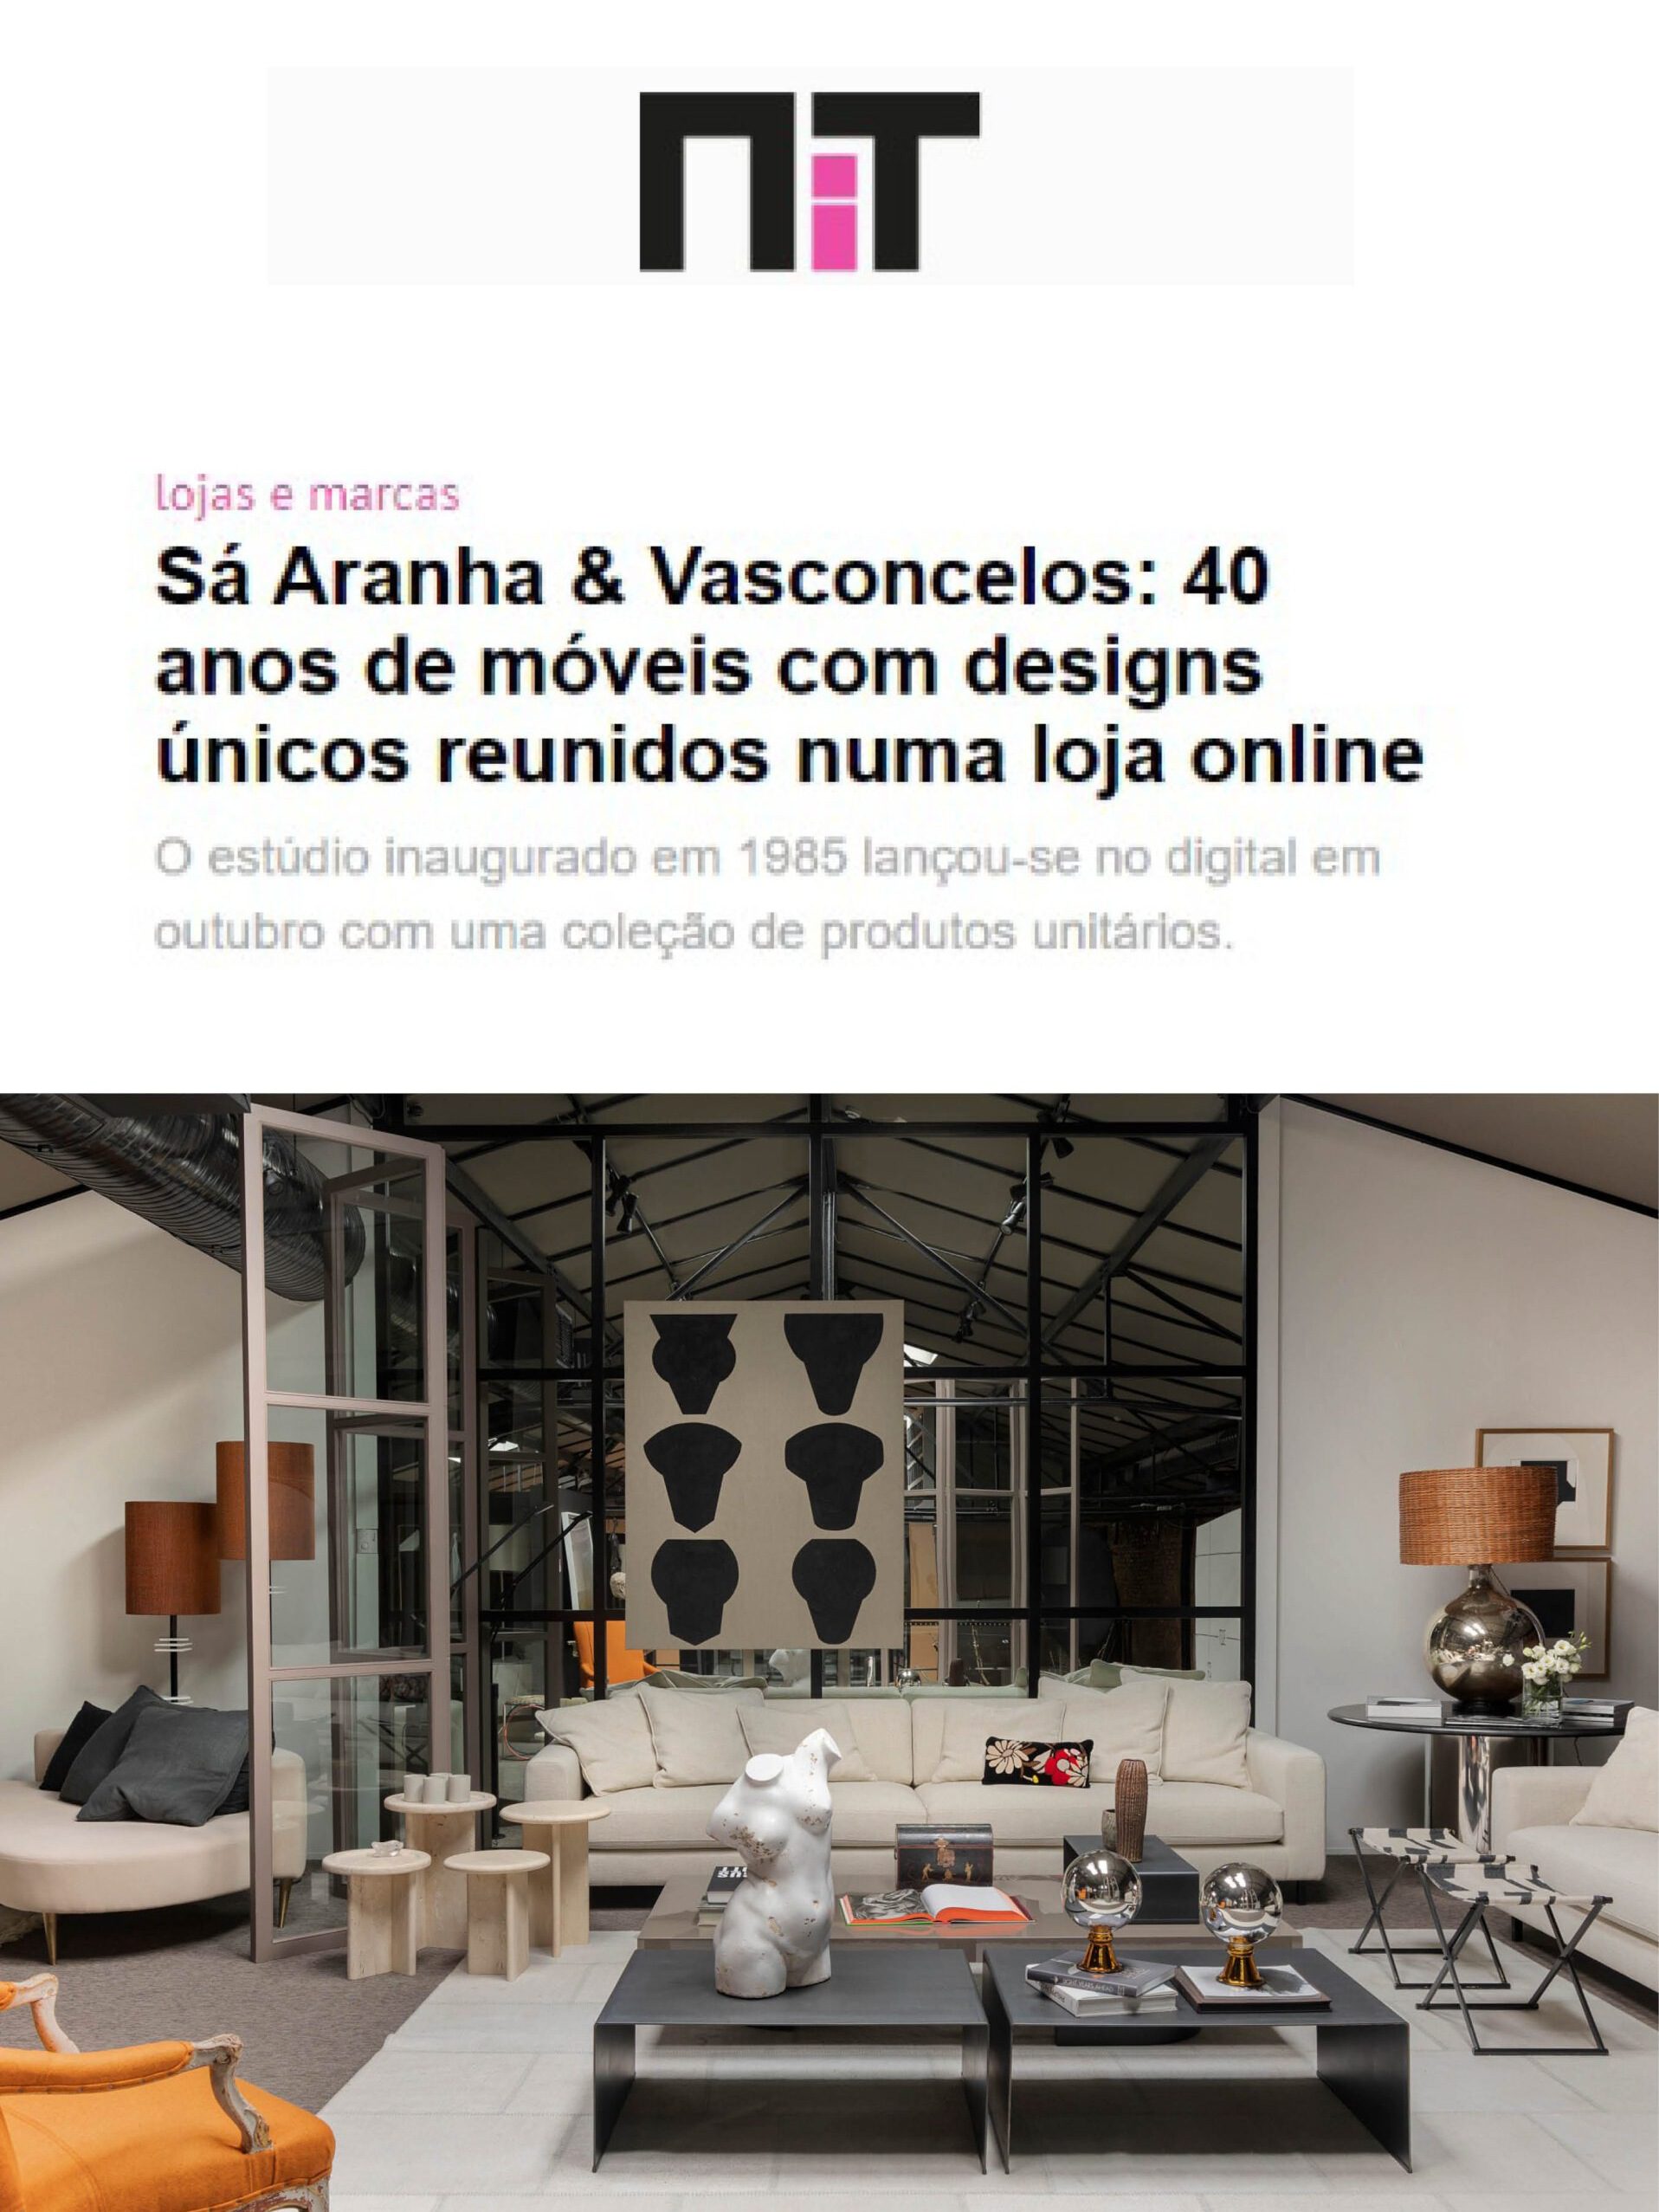 SAV nit november review design architecture project luxury interview showroom deco opened in 1985 project yellow online shop partners rosário tello carmo aranha 40 pieces furniture collection lifestyle